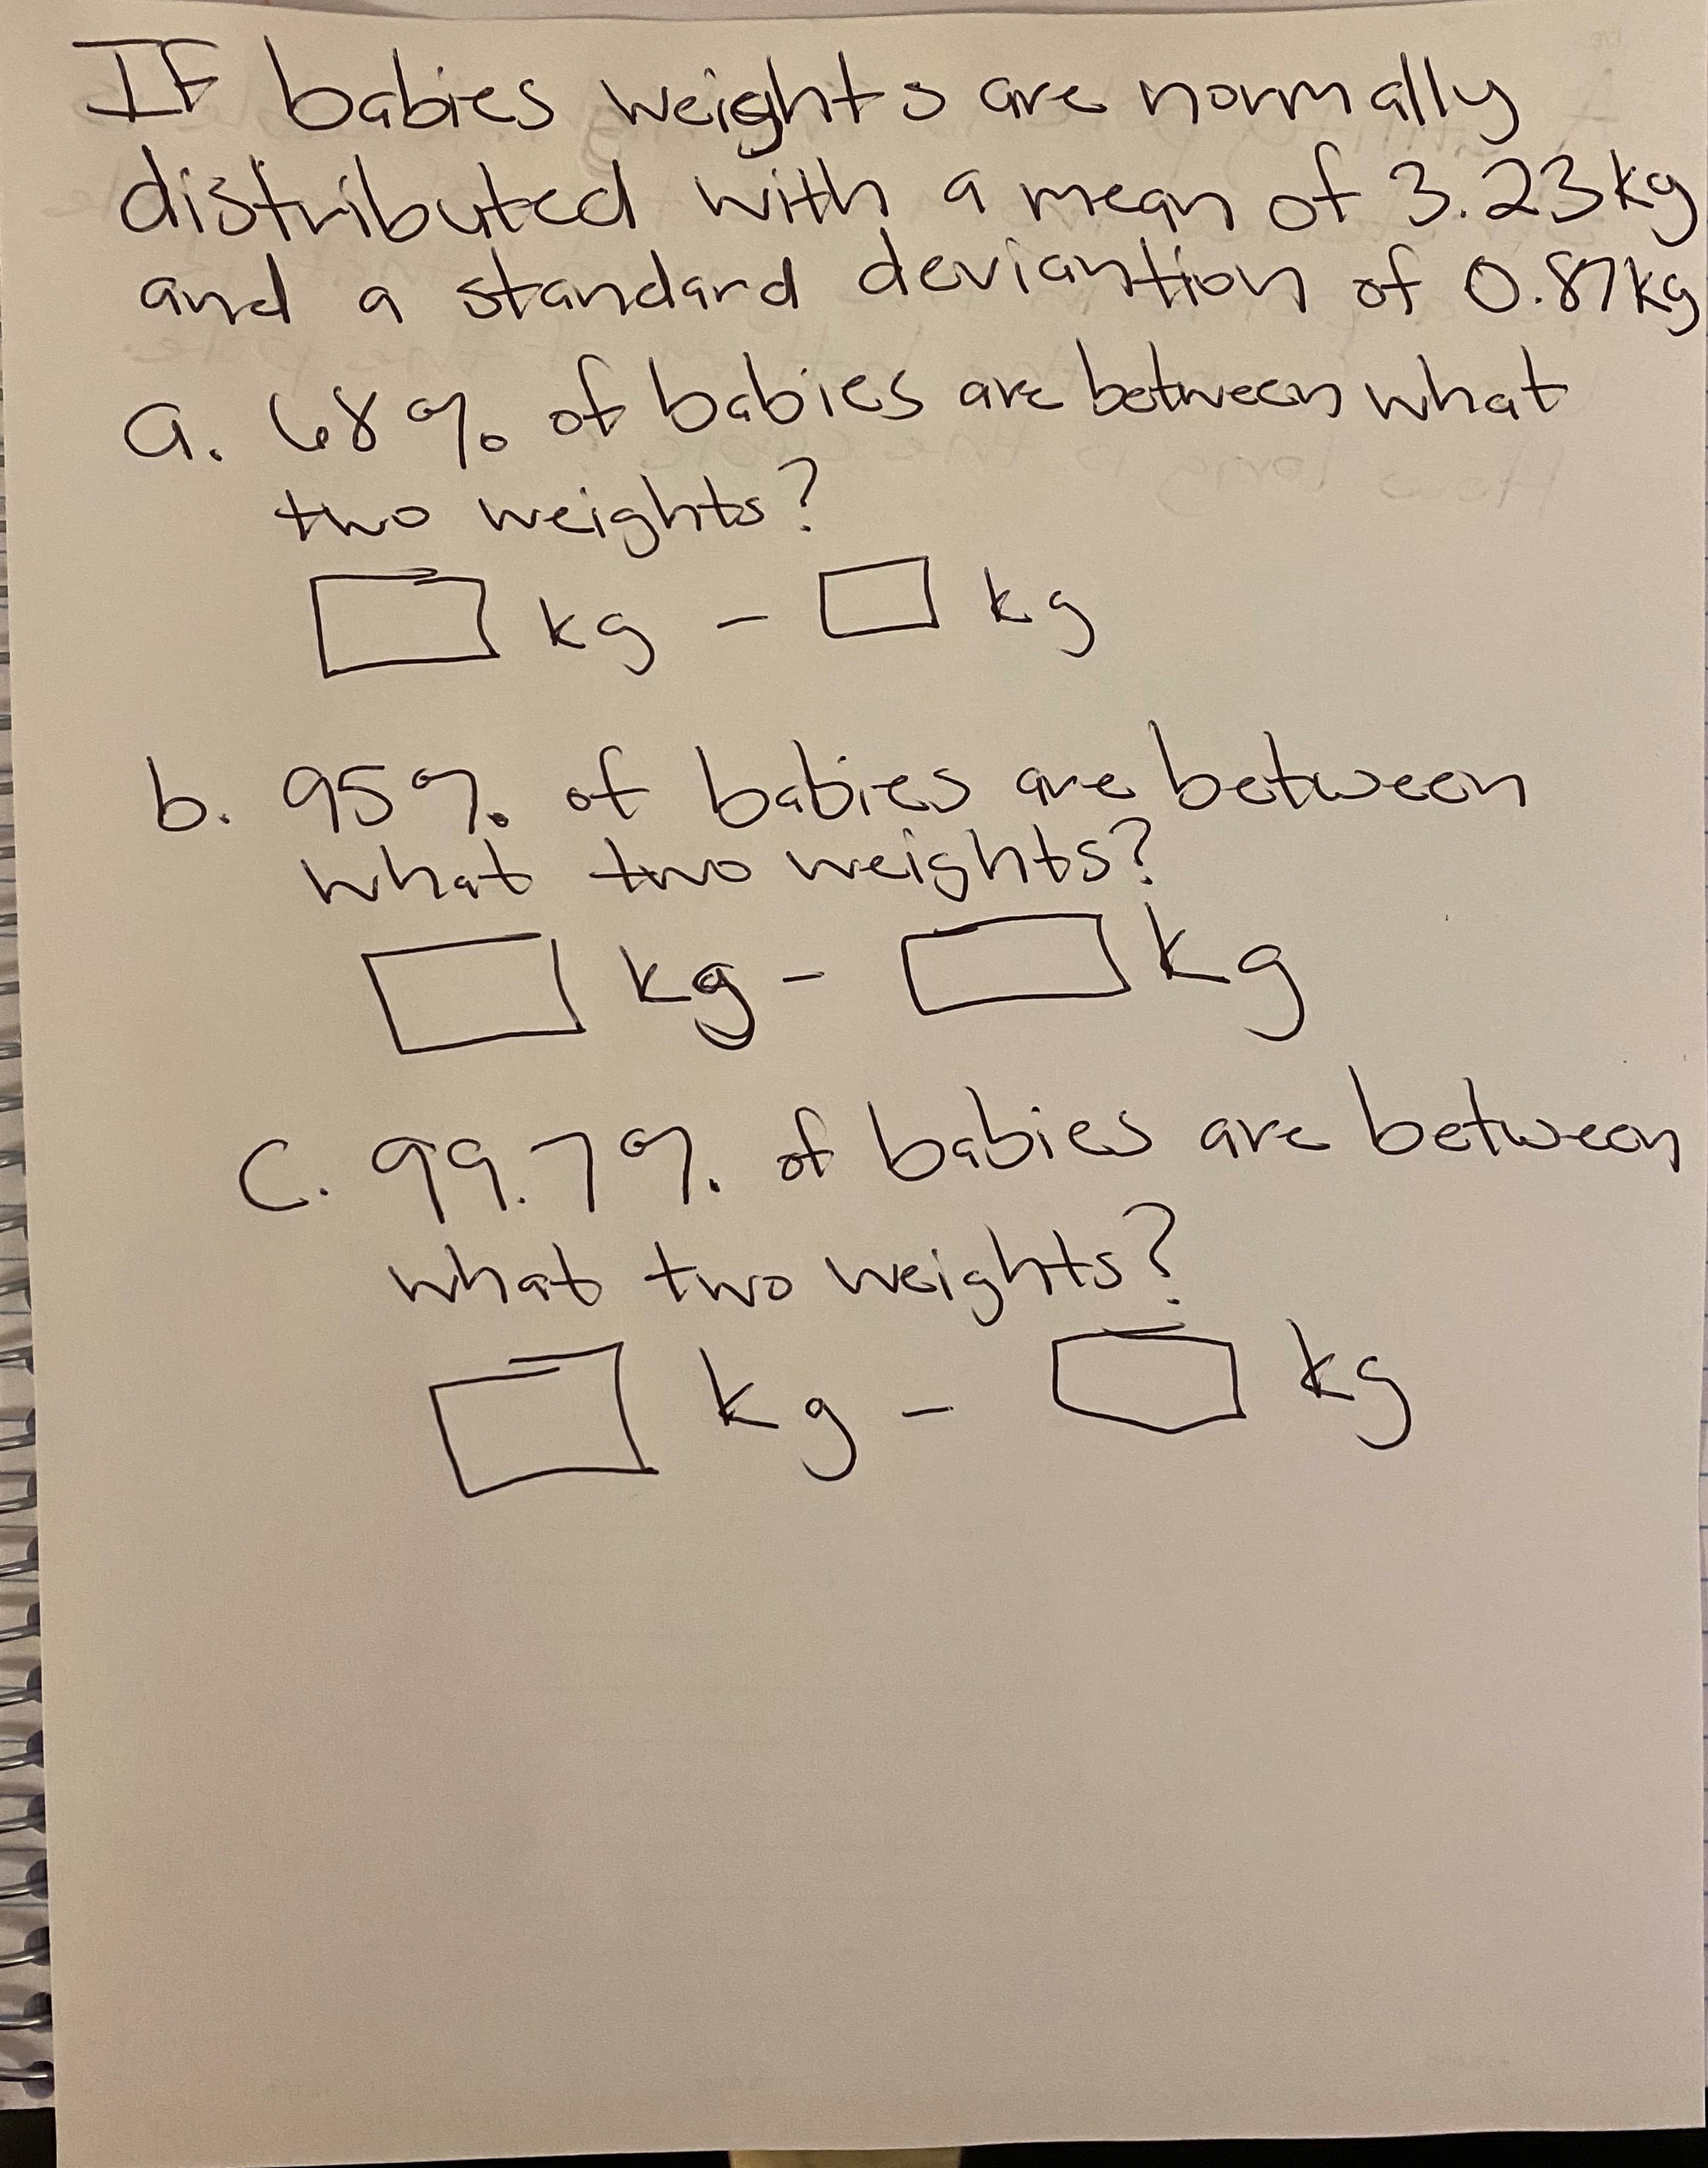 IF babies
Neighto are normally
distributed with a mean ot 3.23ky
and a standard deviantion of 0.87kg
are between what
a. 68% of babics
tho weights?
